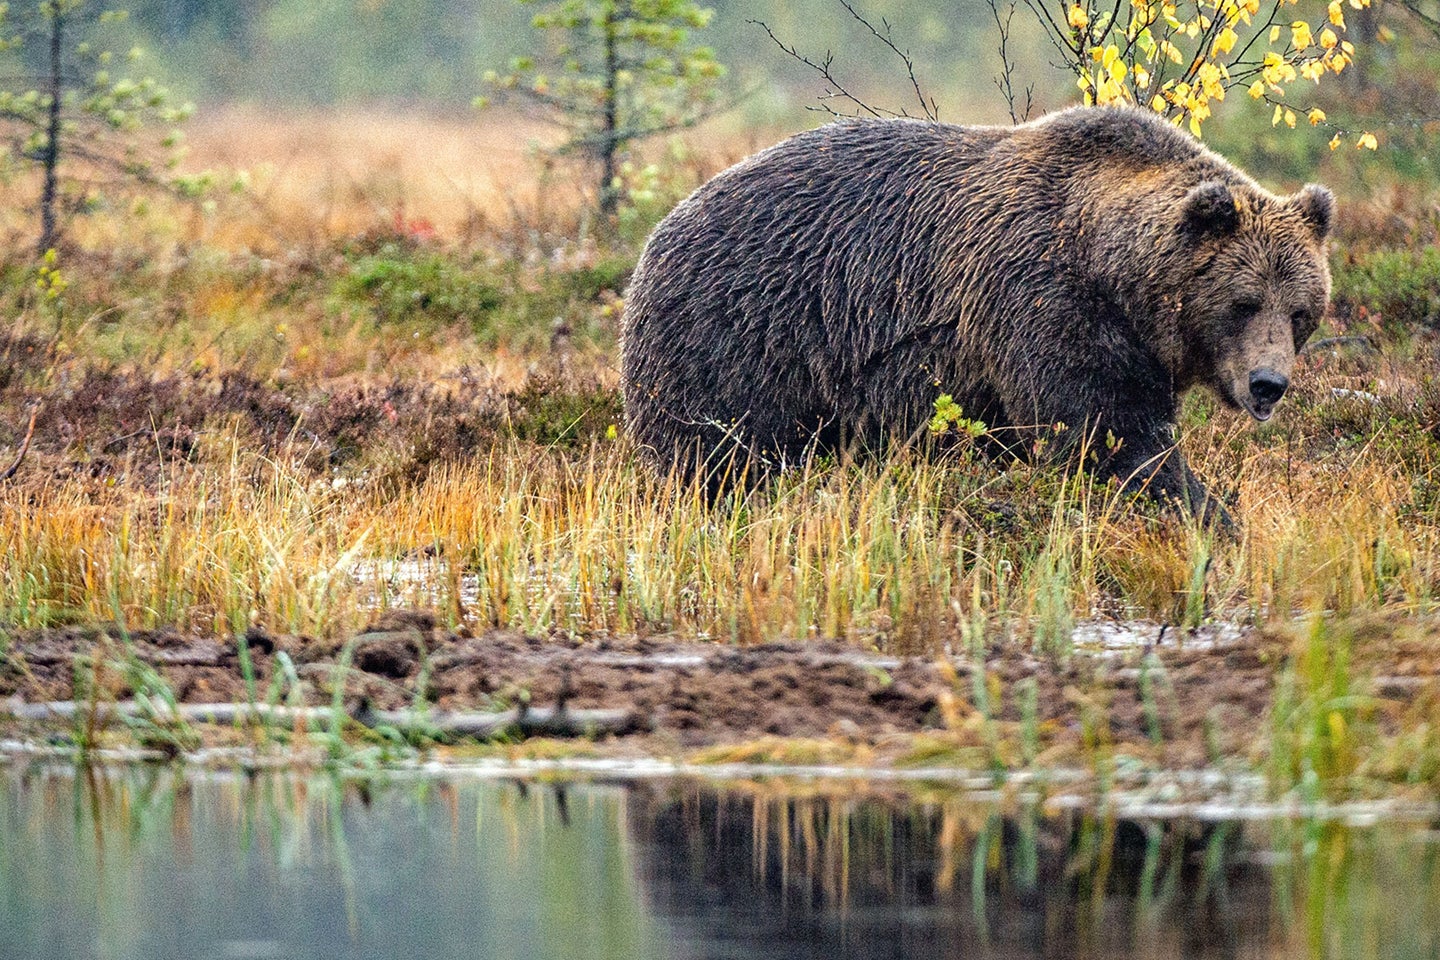 A coastal brown bear walks along the shoreline of an unnamed body of water.